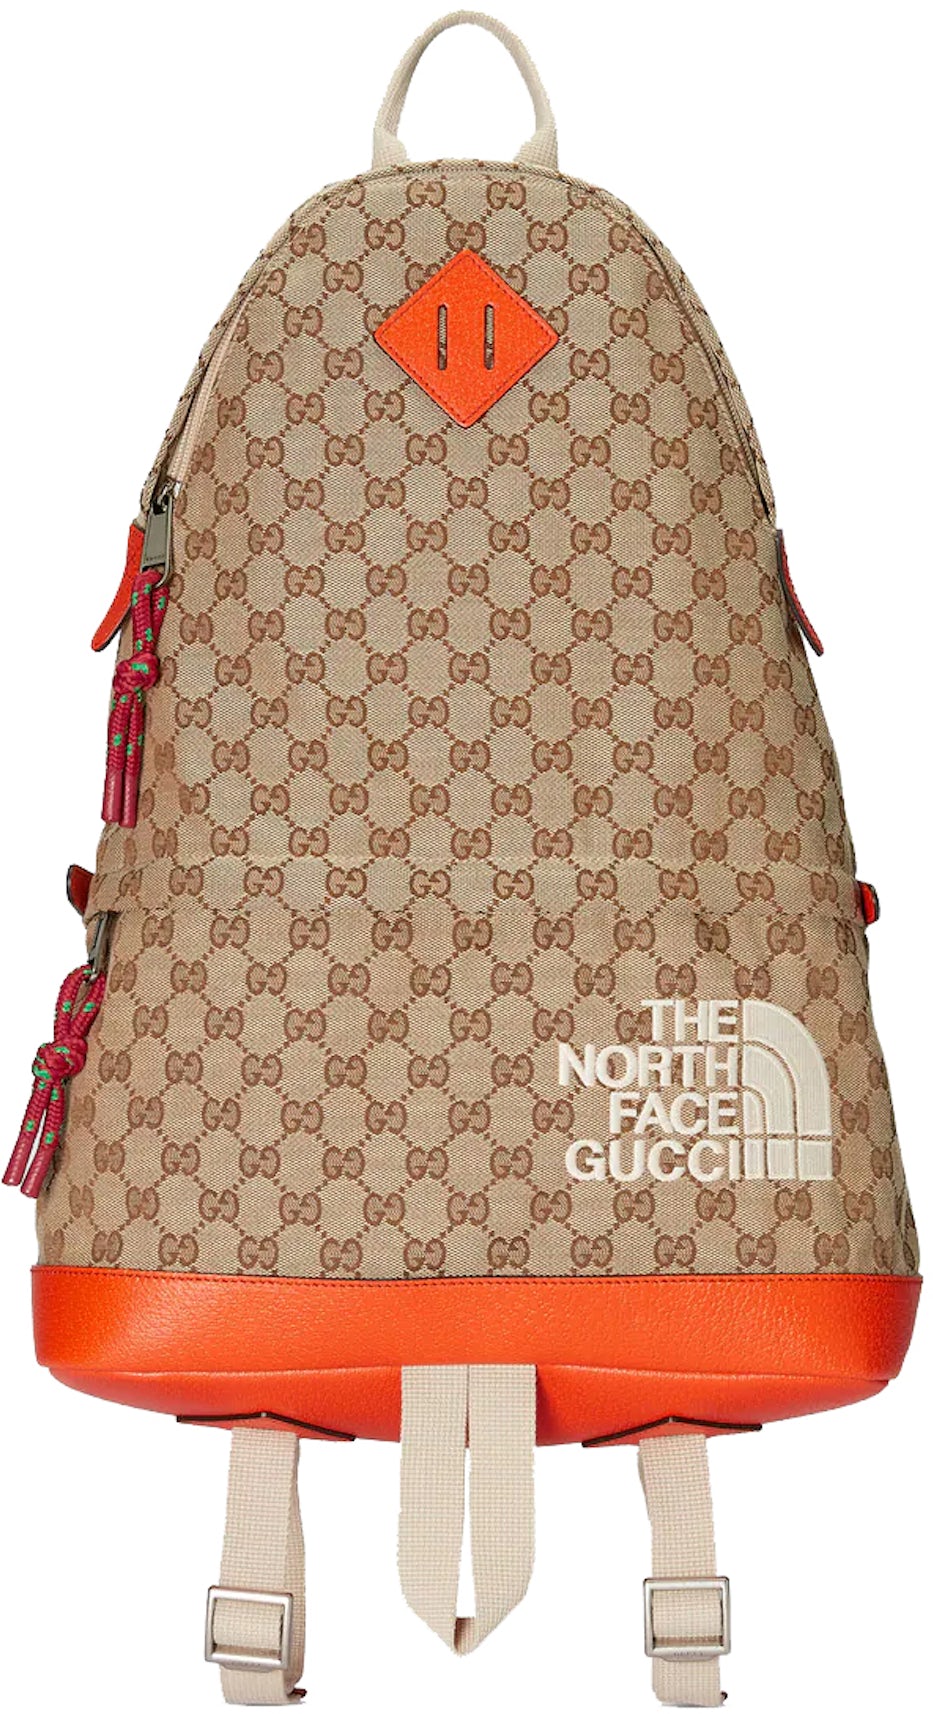 Gucci Creating Backpacks for 100 Thieves Collab